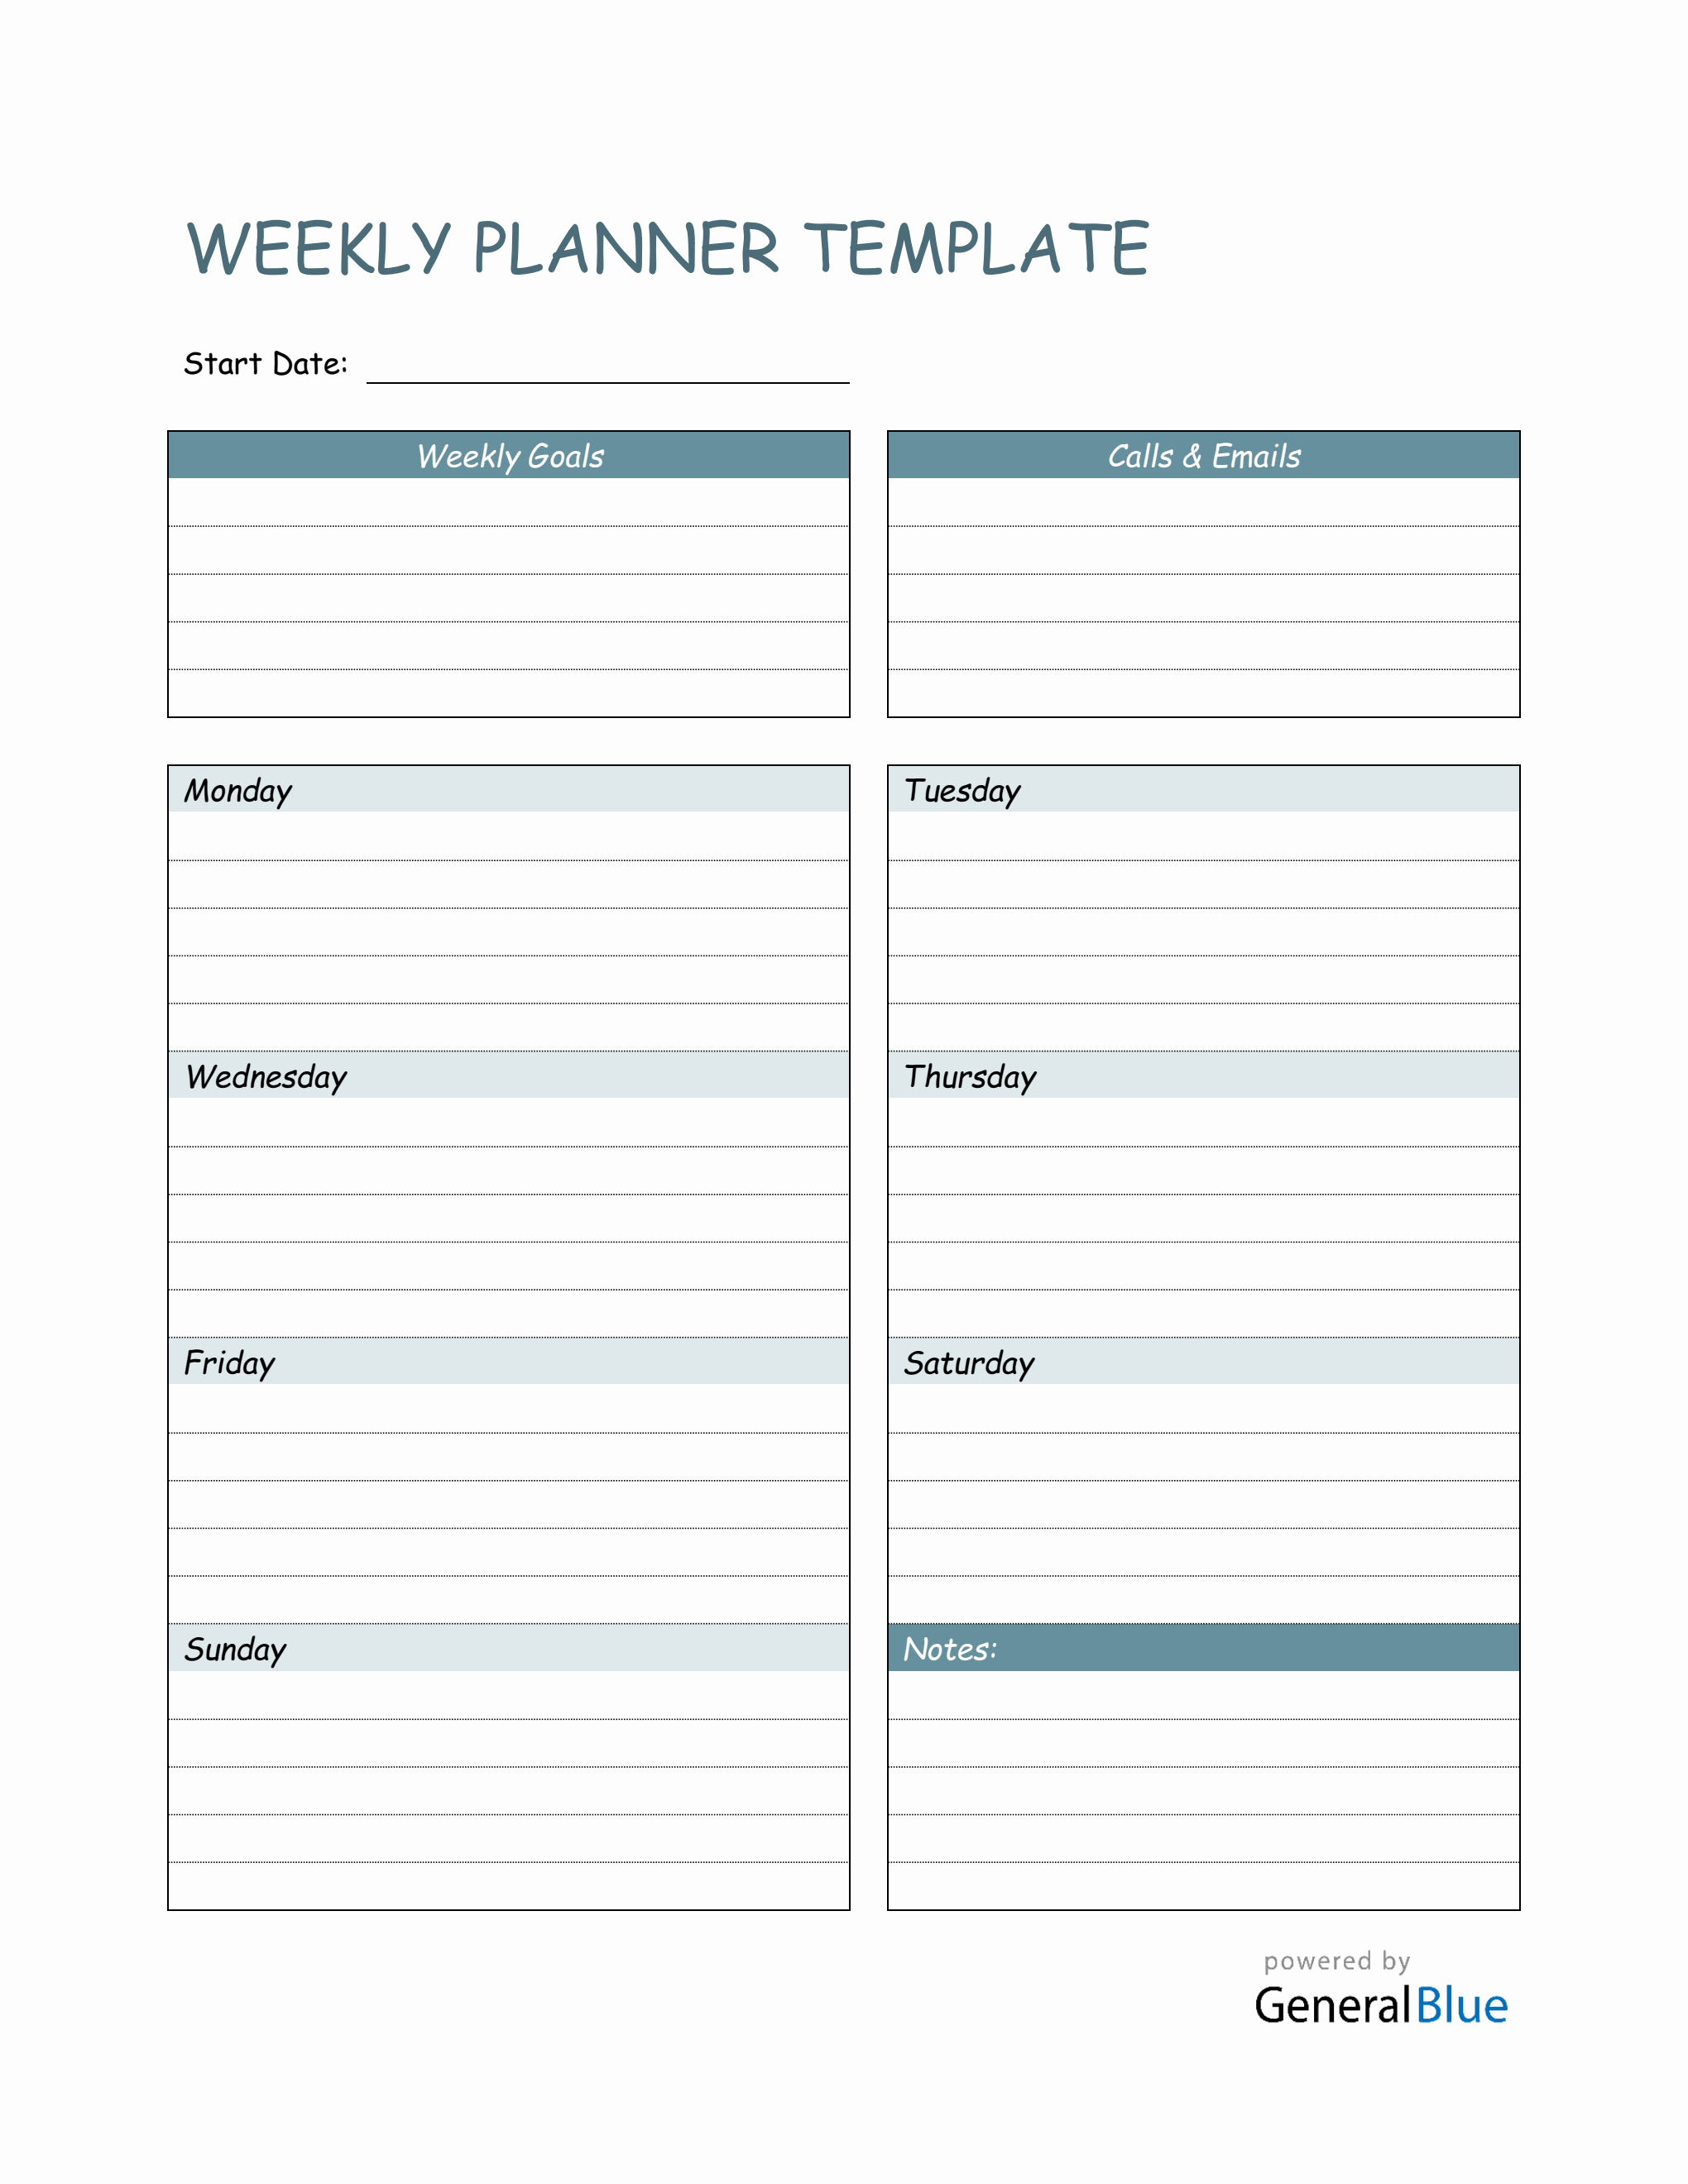 Weekly Planner Templates Professional Word Templates - Riset